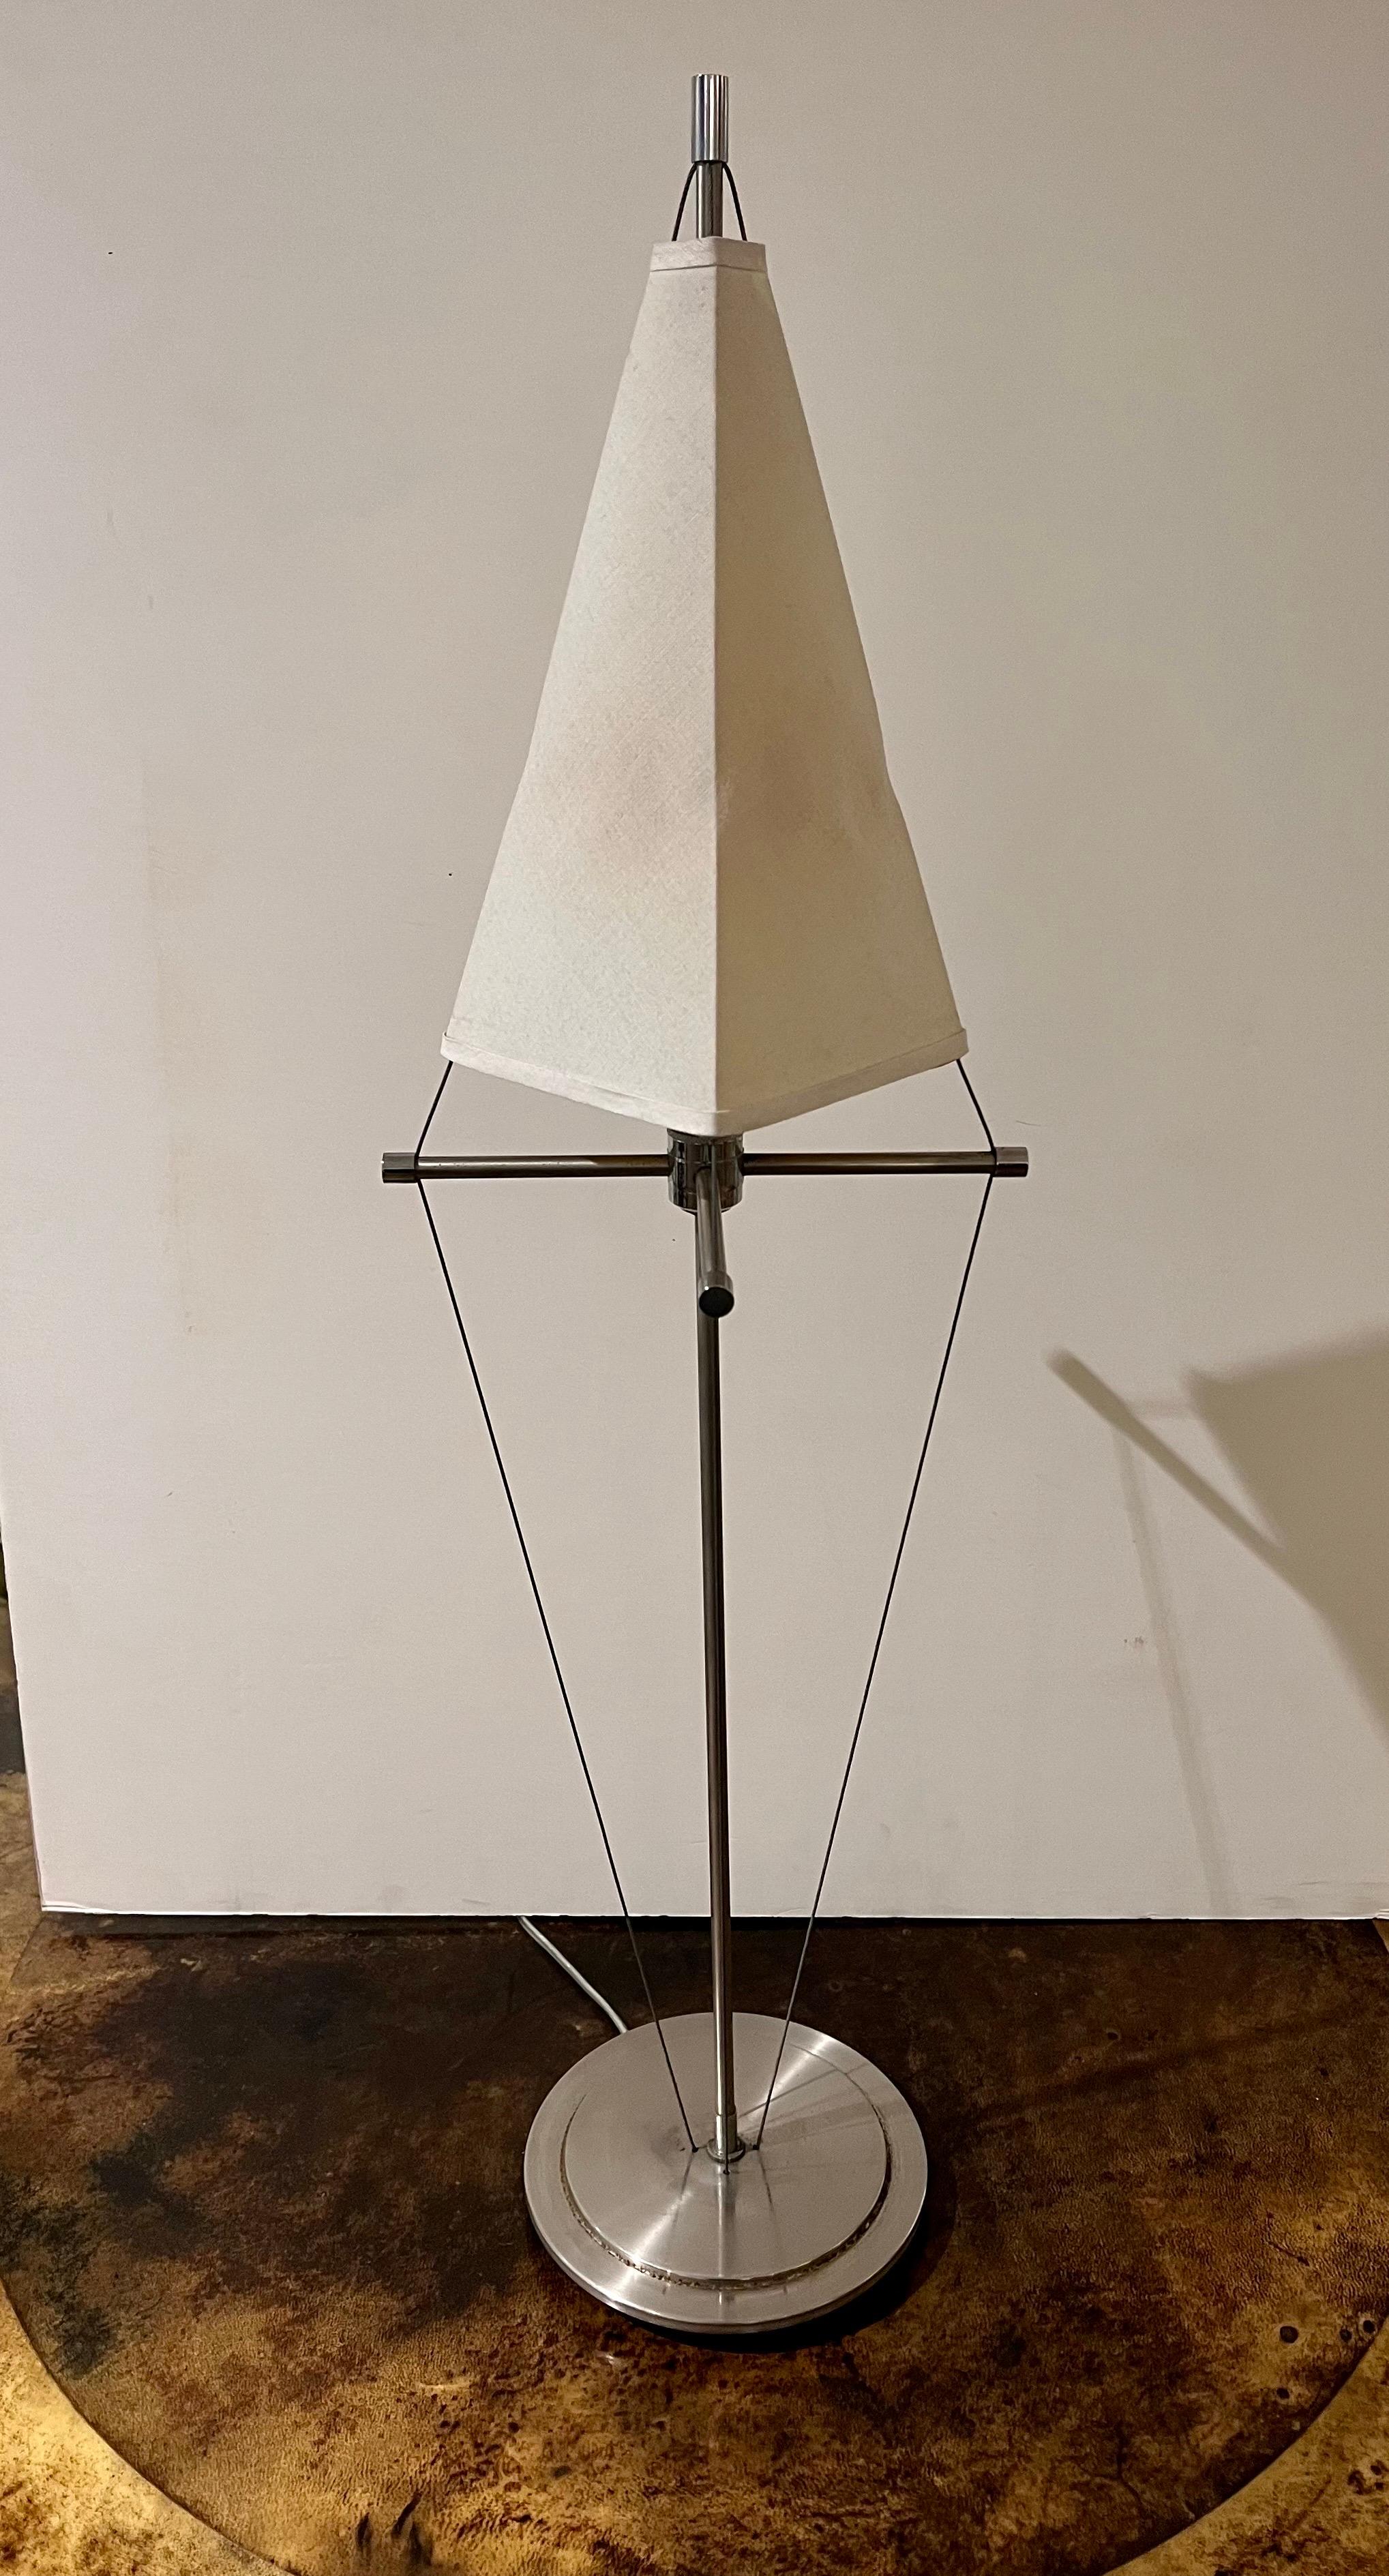 Original and very rare kite lamp postmodern, designed by Robert sonneman for george Kovacs, circa 1980's the lamp shows some rust due to age but comes with its original shade worn as shown.